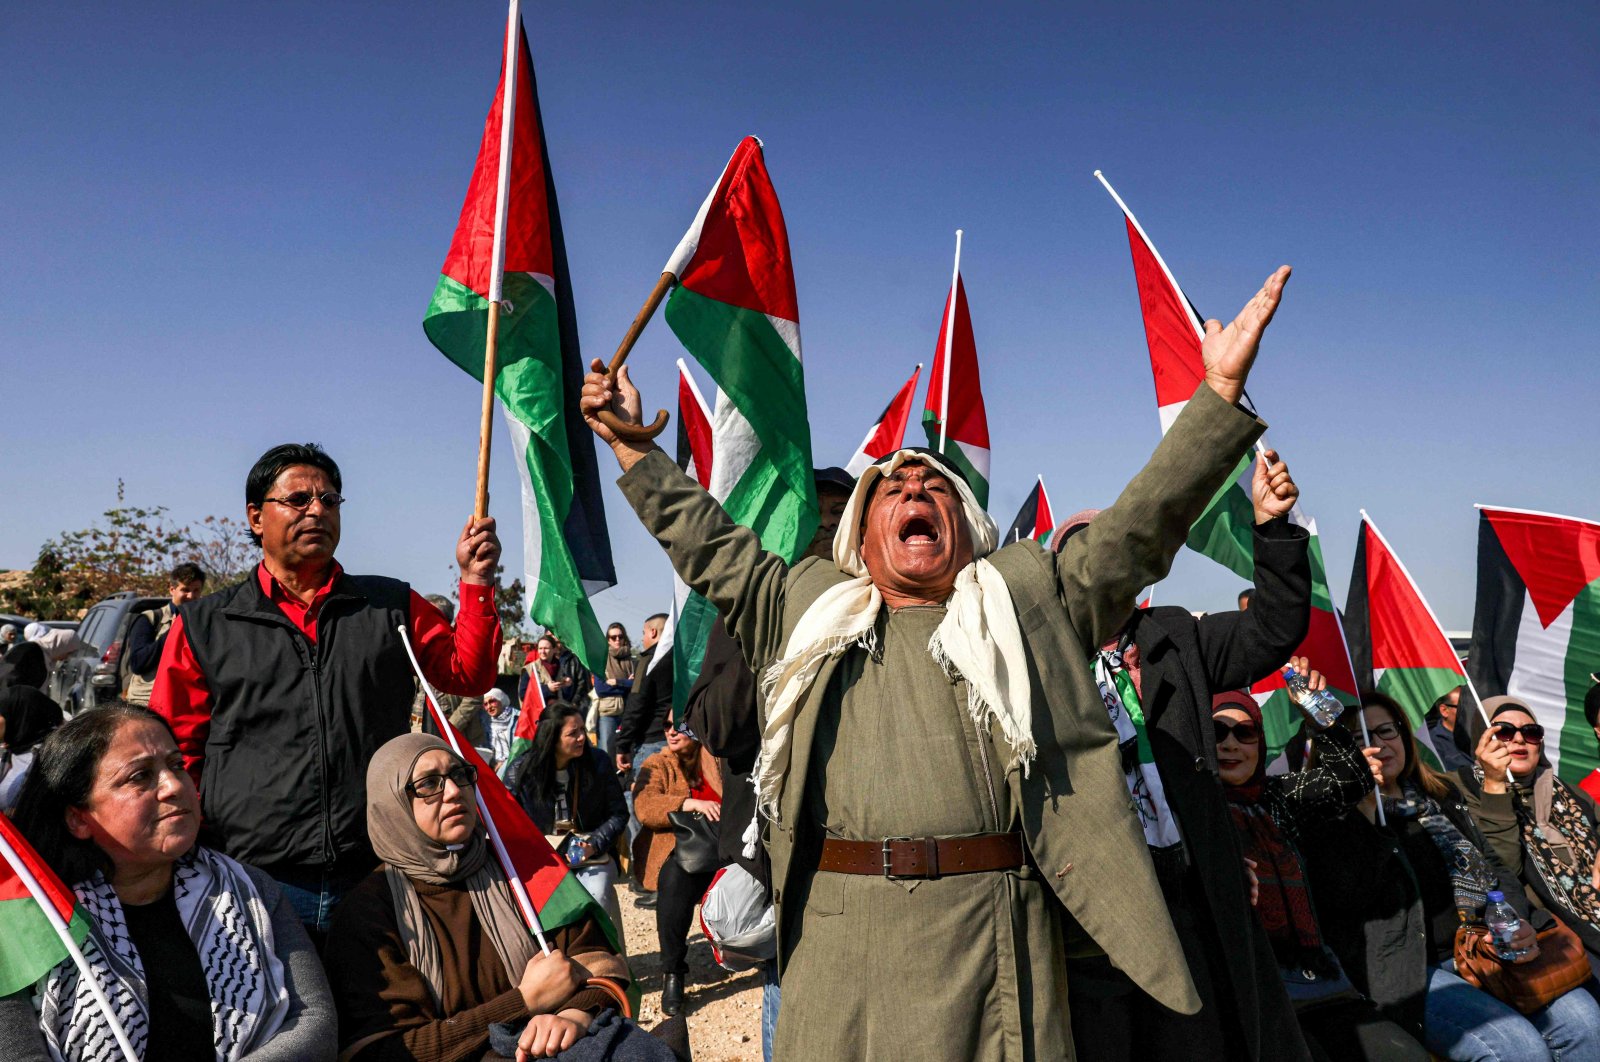 Palestinians and Israeli left-wing activists demonstrate against the evacuation of Bedouins in the village of Khan al-Ahmar, occupied West Bank, Palestine, Jan. 23, 2023. (AFP Photo)